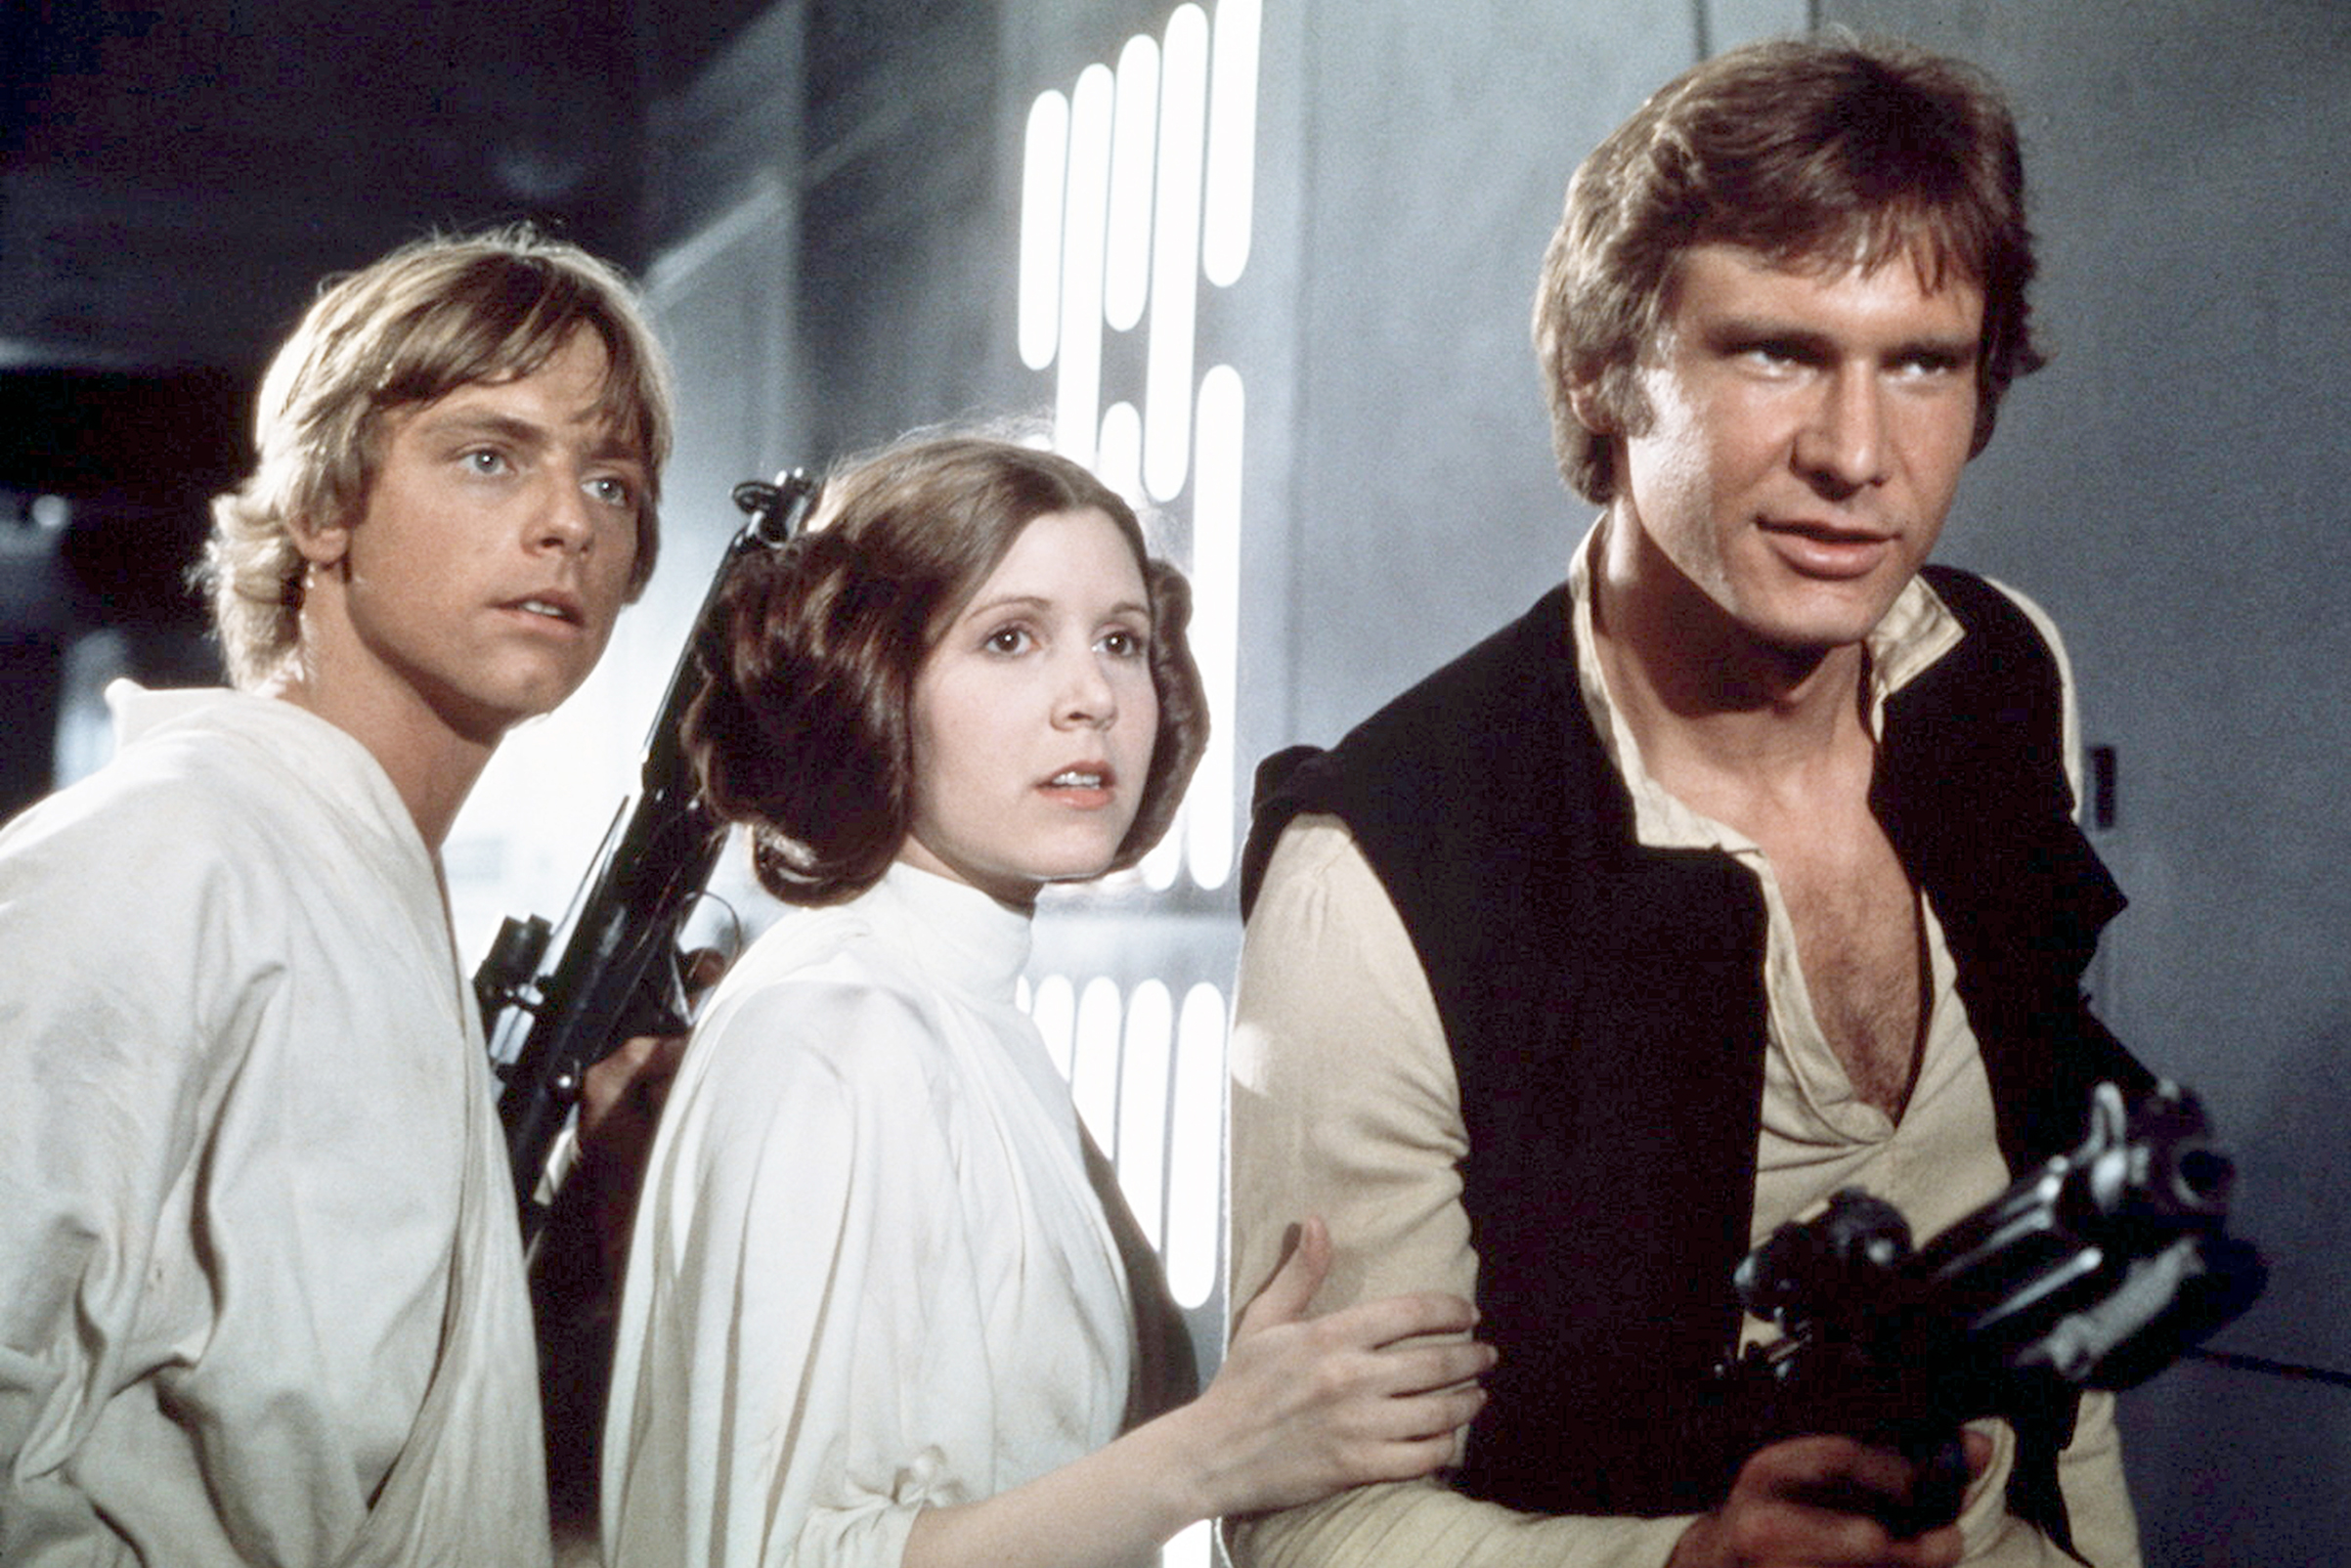 American actors Mark Hamill, Carrie Fisher and Harrison Ford on the set of Star Wars: Episode IV - A New Hope. (Sunset Boulevard/Corbis/Getty Images)